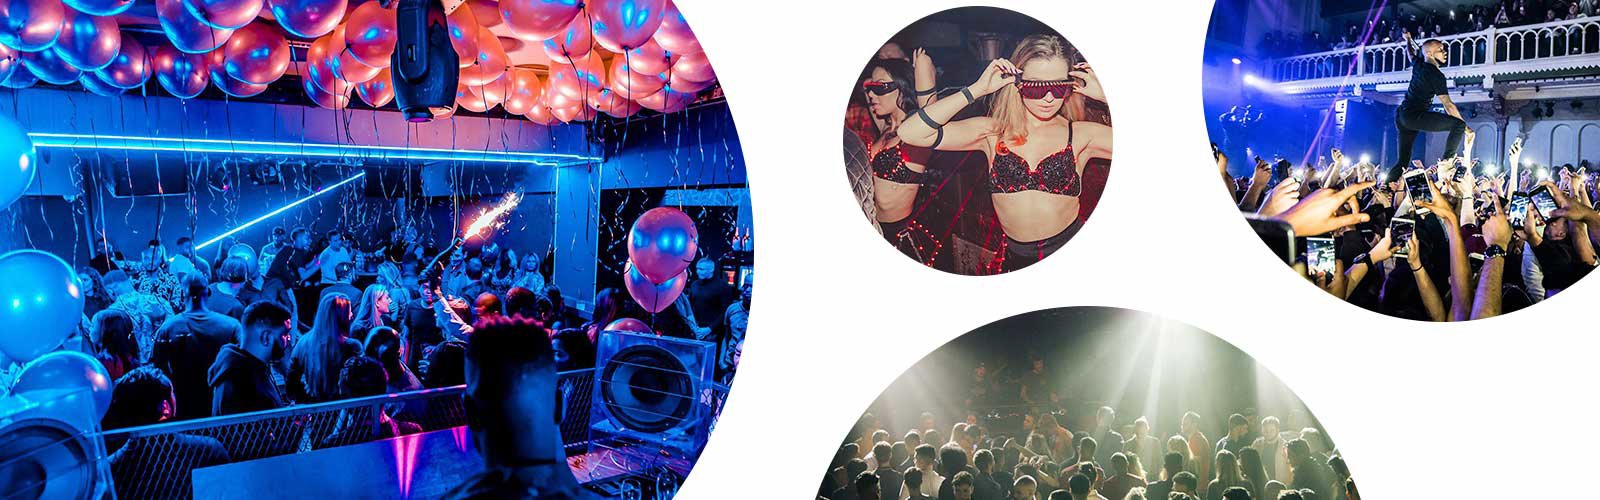 10 of the best clubs in Amsterdam, Amsterdam holidays